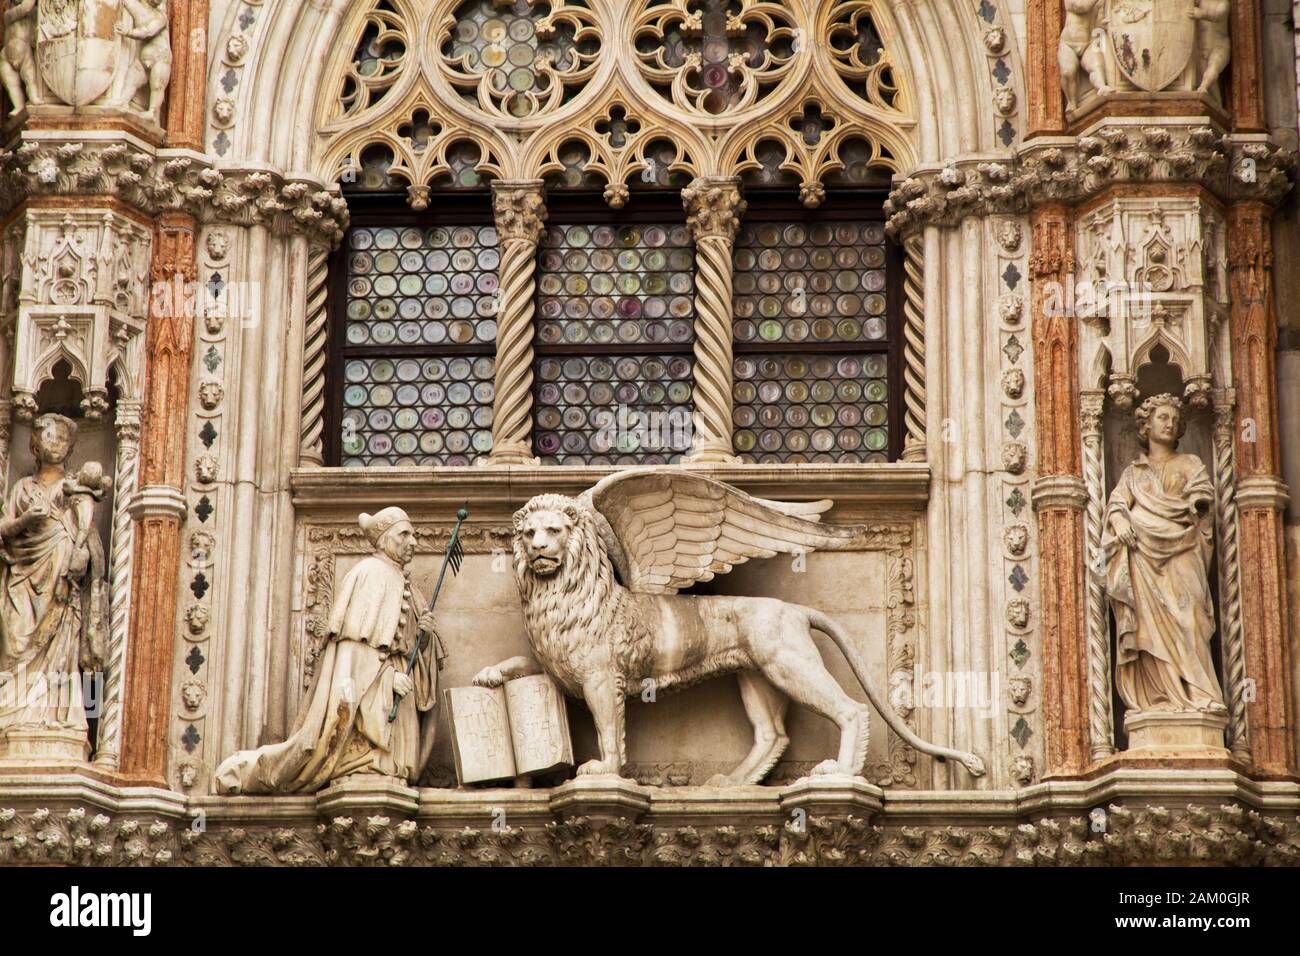 The Porta della Carta with its statue of Doge Foscari and the Lion of St Mark is the entrance to the court of the Palazzo Ducale in Venice Italy Stock Photo